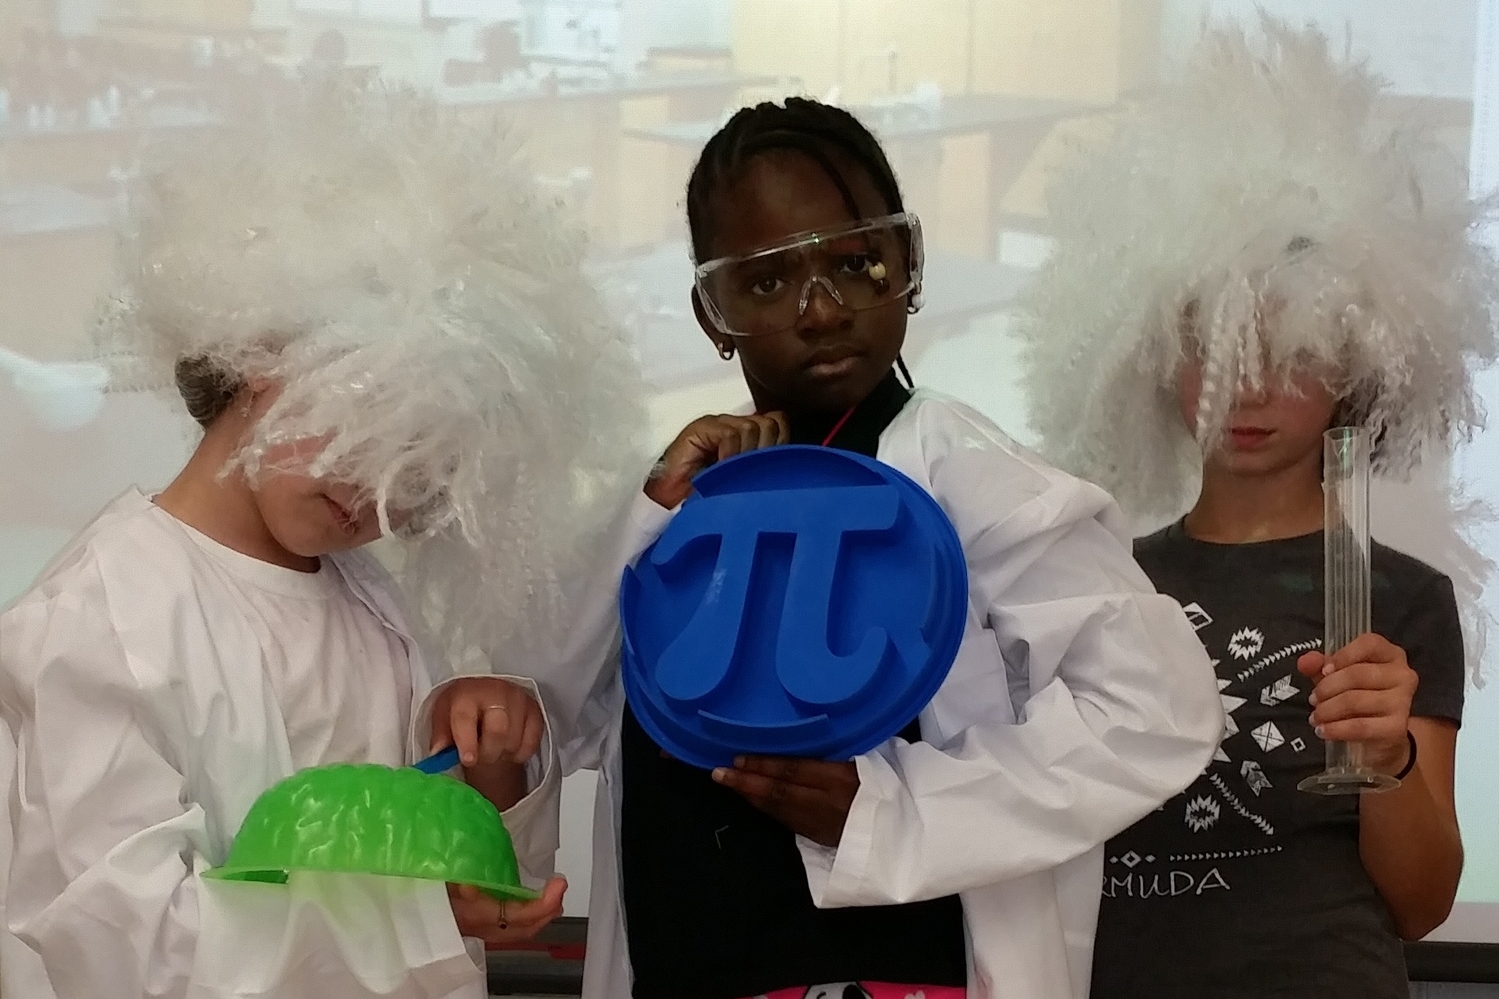 g4g Day@New York 2014 – Launch with "Trick-or-treat for Science"- Photobooth with pi!